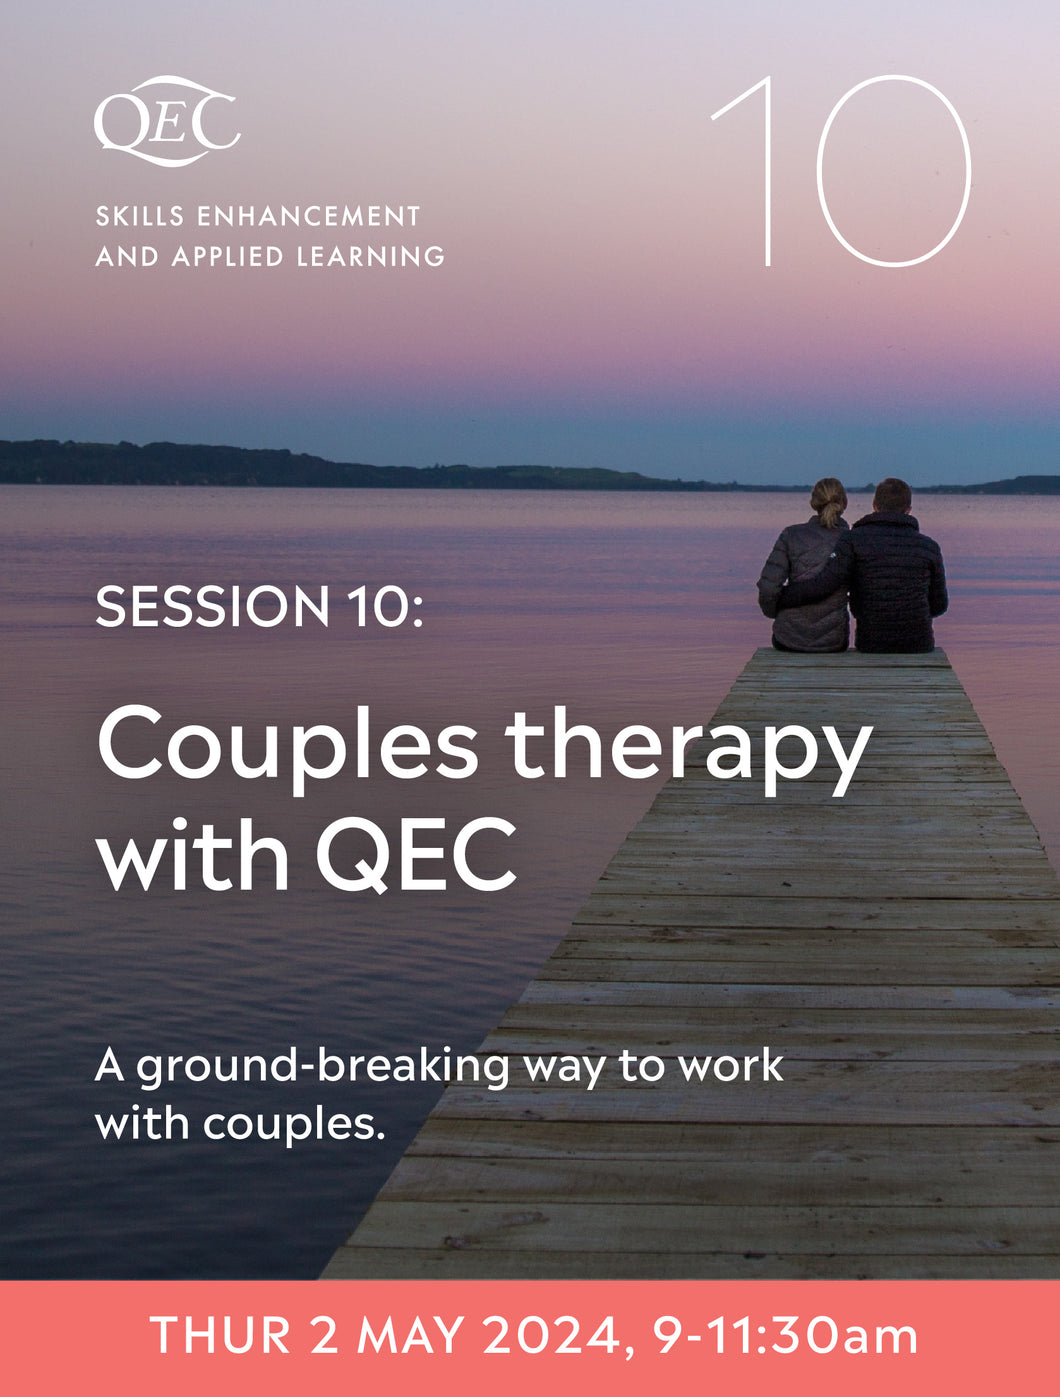 SEAL Session 10: Couples therapy with QEC - 2 May 24 (9-11.30am, UK time)